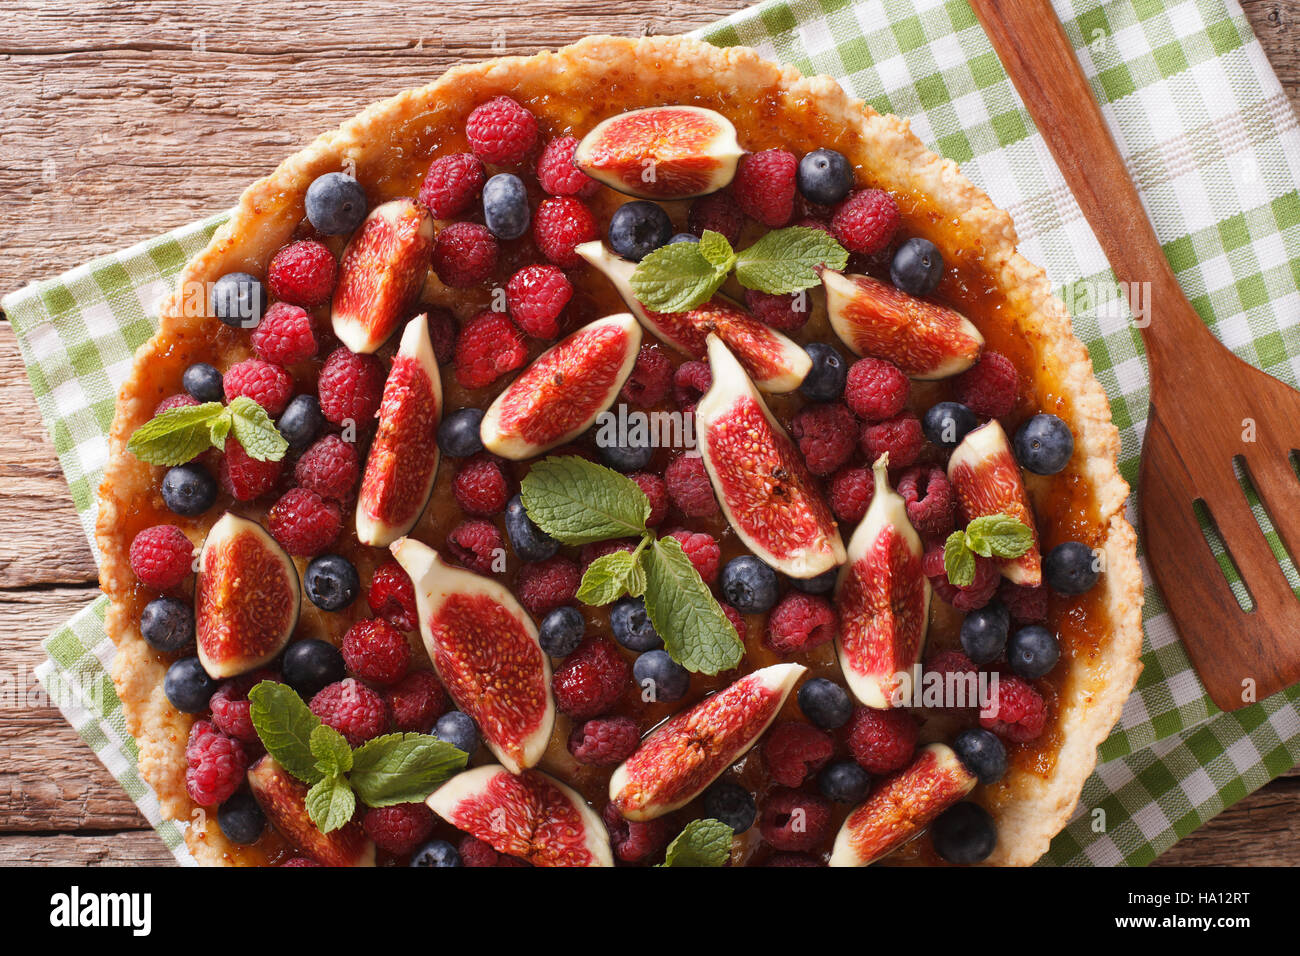 Delicious pastry: tart with fresh figs, raspberries and blueberries close-up on the table. Horizontal view from above Stock Photo